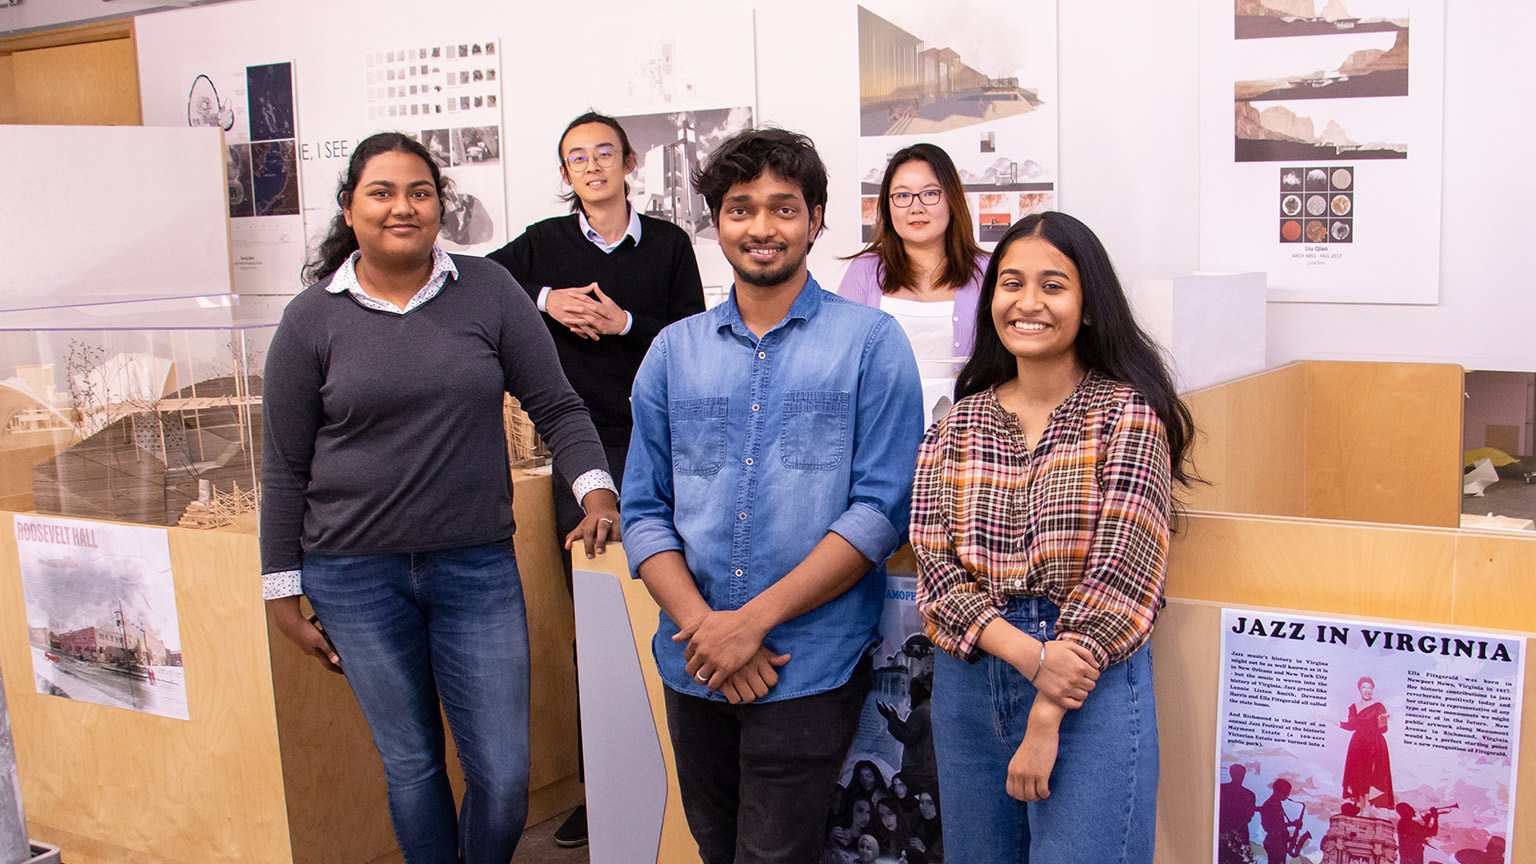 Group shot of five students in front of urban design posters